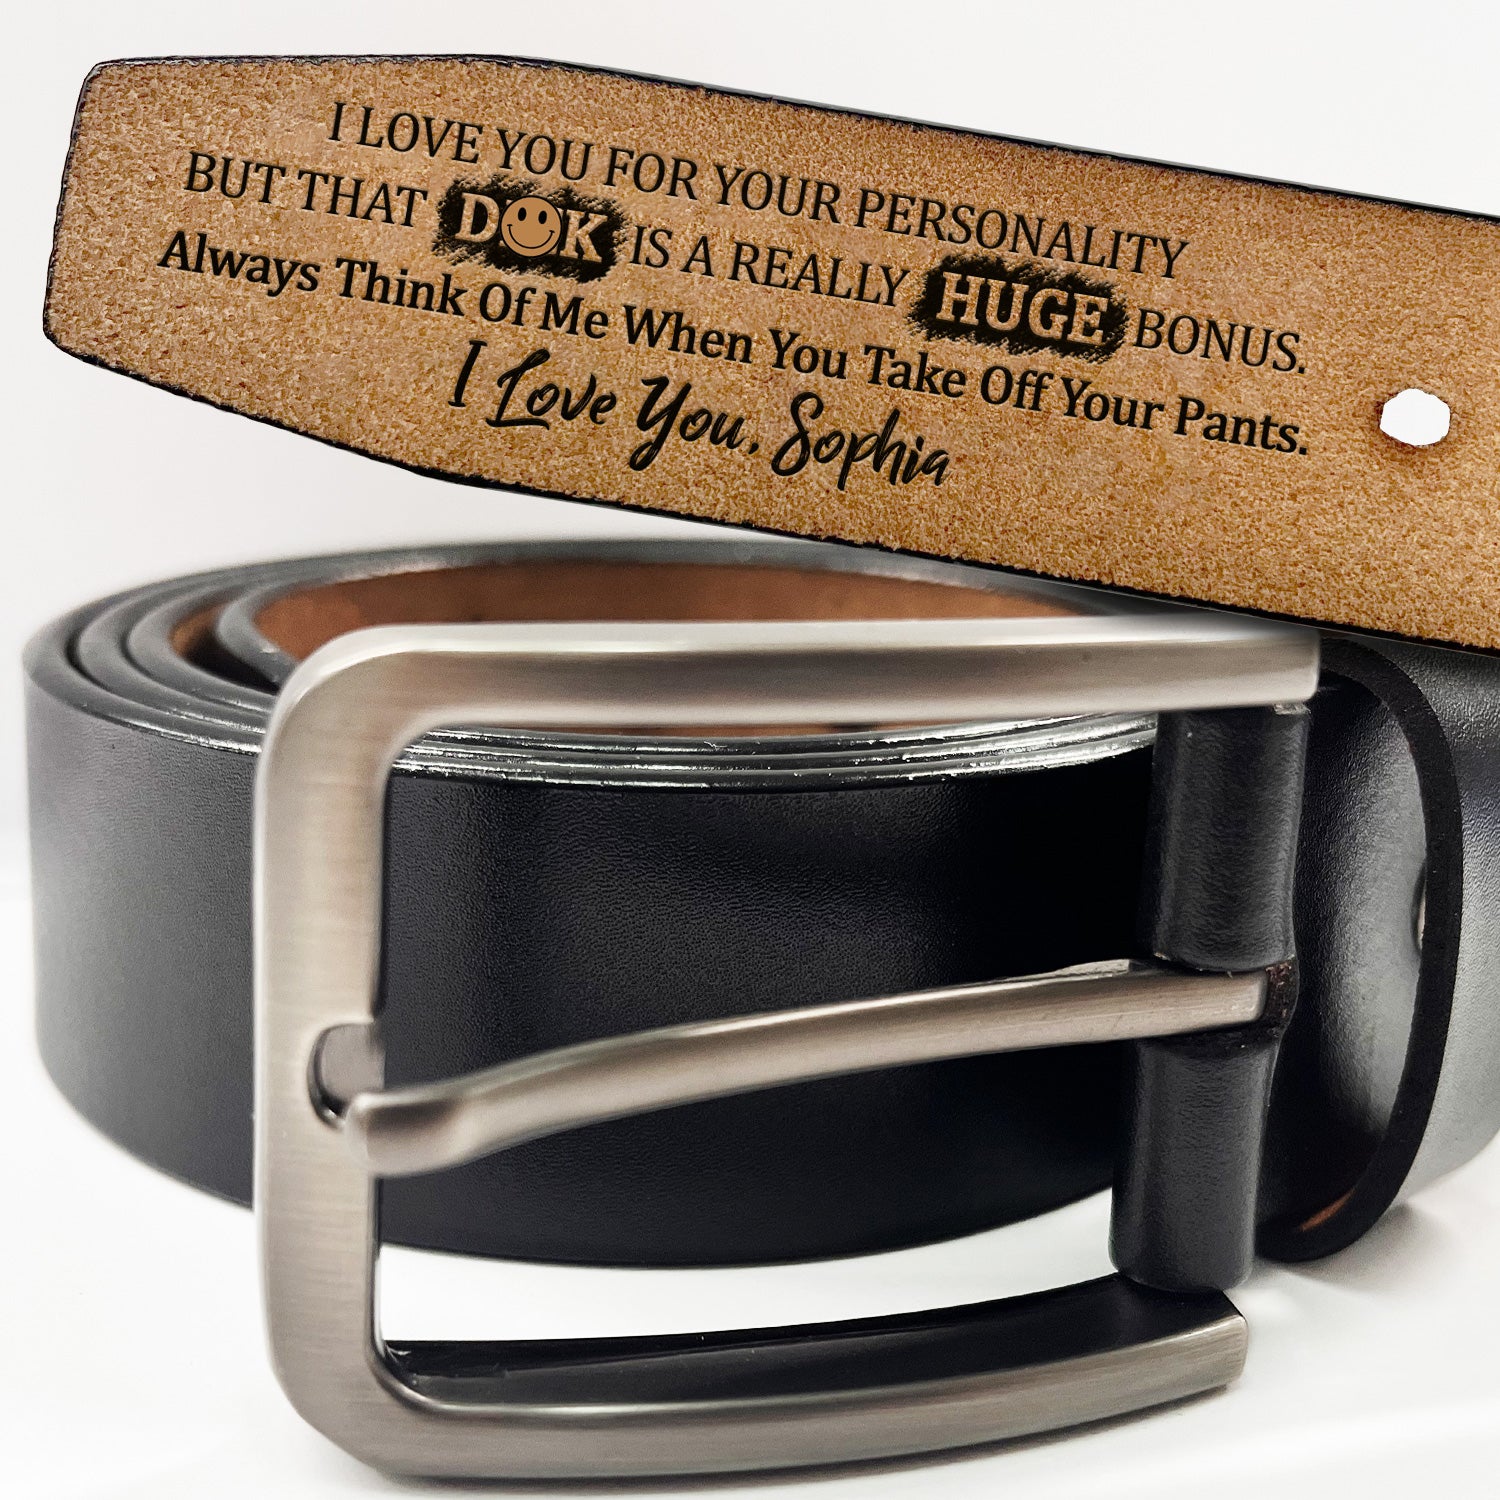 I Love You For Your Personality But That's A Huge Bonus - Funny Gift For Husband, Boyfriend, Spouse, Fiance, Dad Gift - Personalized Engraved Leather Belt